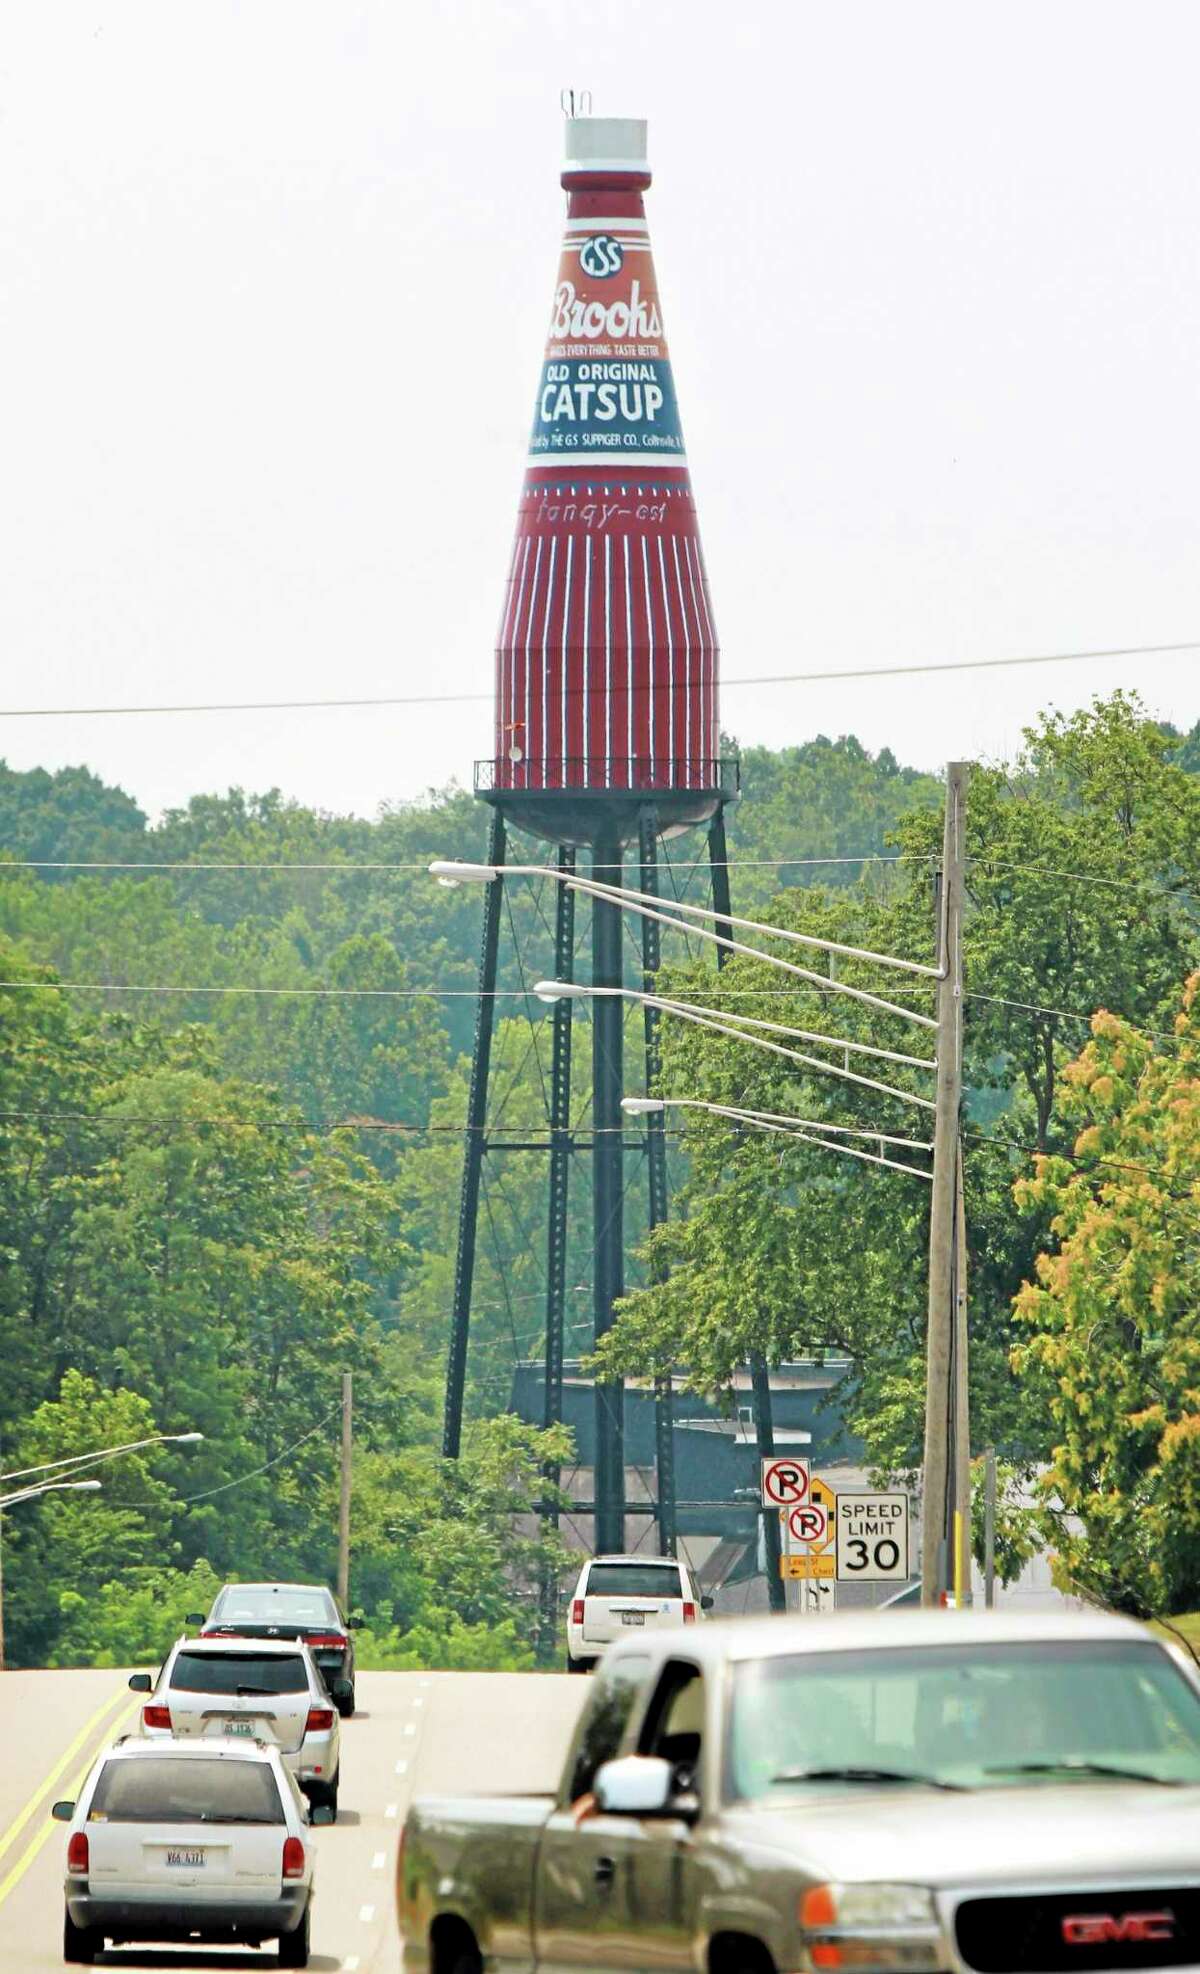 A 170-foot giant ketchup bottle, billed as the "World's Largest Bottle of Catsup,î and once served as a water tower is seen Tuesday, July 22, 2014, in Collinsville, Ill. A ìFor Saleî has been placed in front of the landmark that replicates a bottle of Brooks Old Original Rich and Tangy Catsup, which was produced in the buildings beneath the tower. The 100,000-gallon tower held water _ never ketchup _ and hasn't been used since Brooks moved out in the early 1960s. (AP Photo/Belleville News-Democrat, Derik Holtmann)